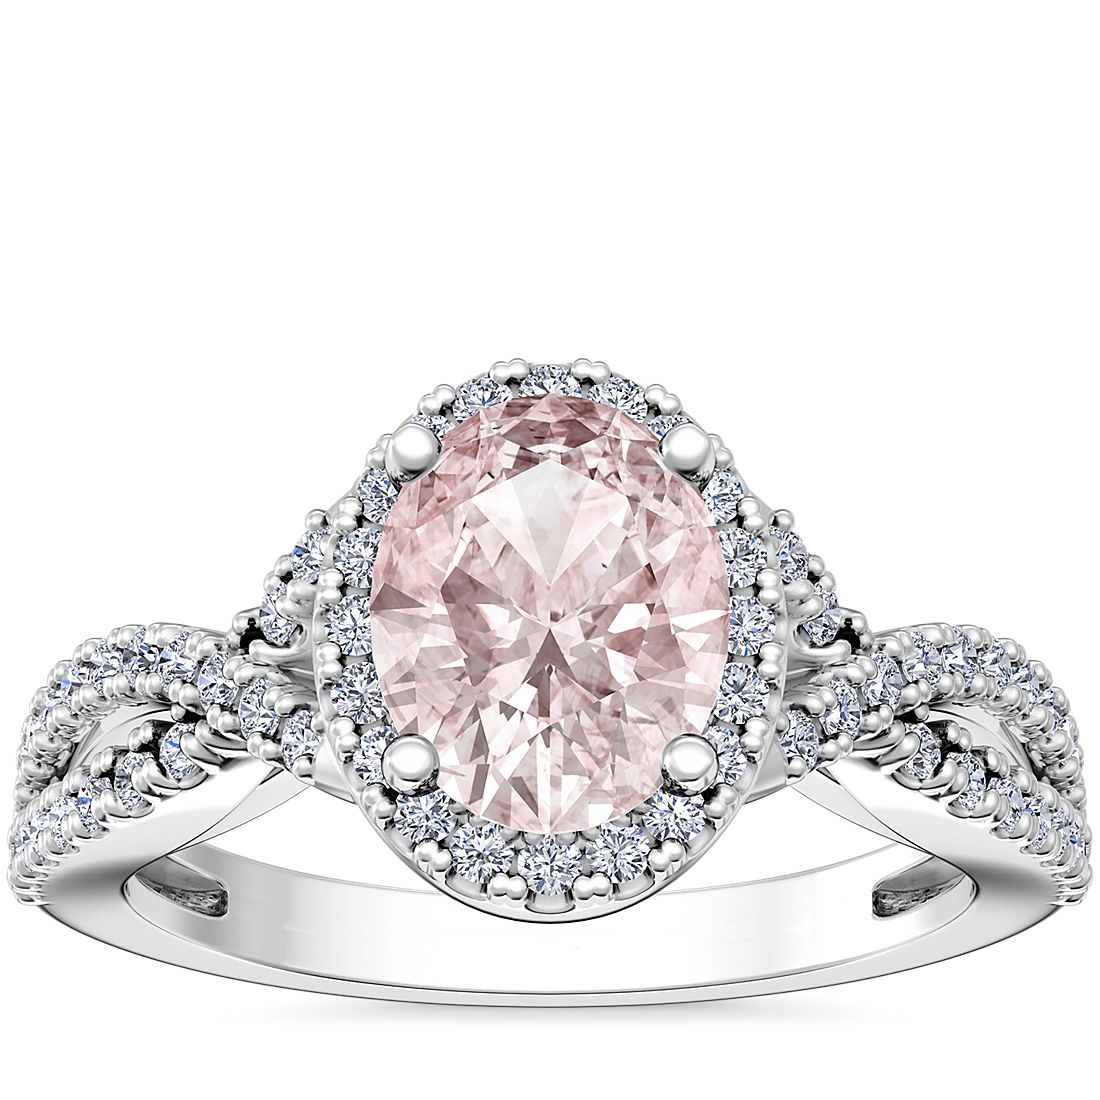 Twist Halo Diamond Engagement Ring with Oval Morganite in Platinum (9x7mm)